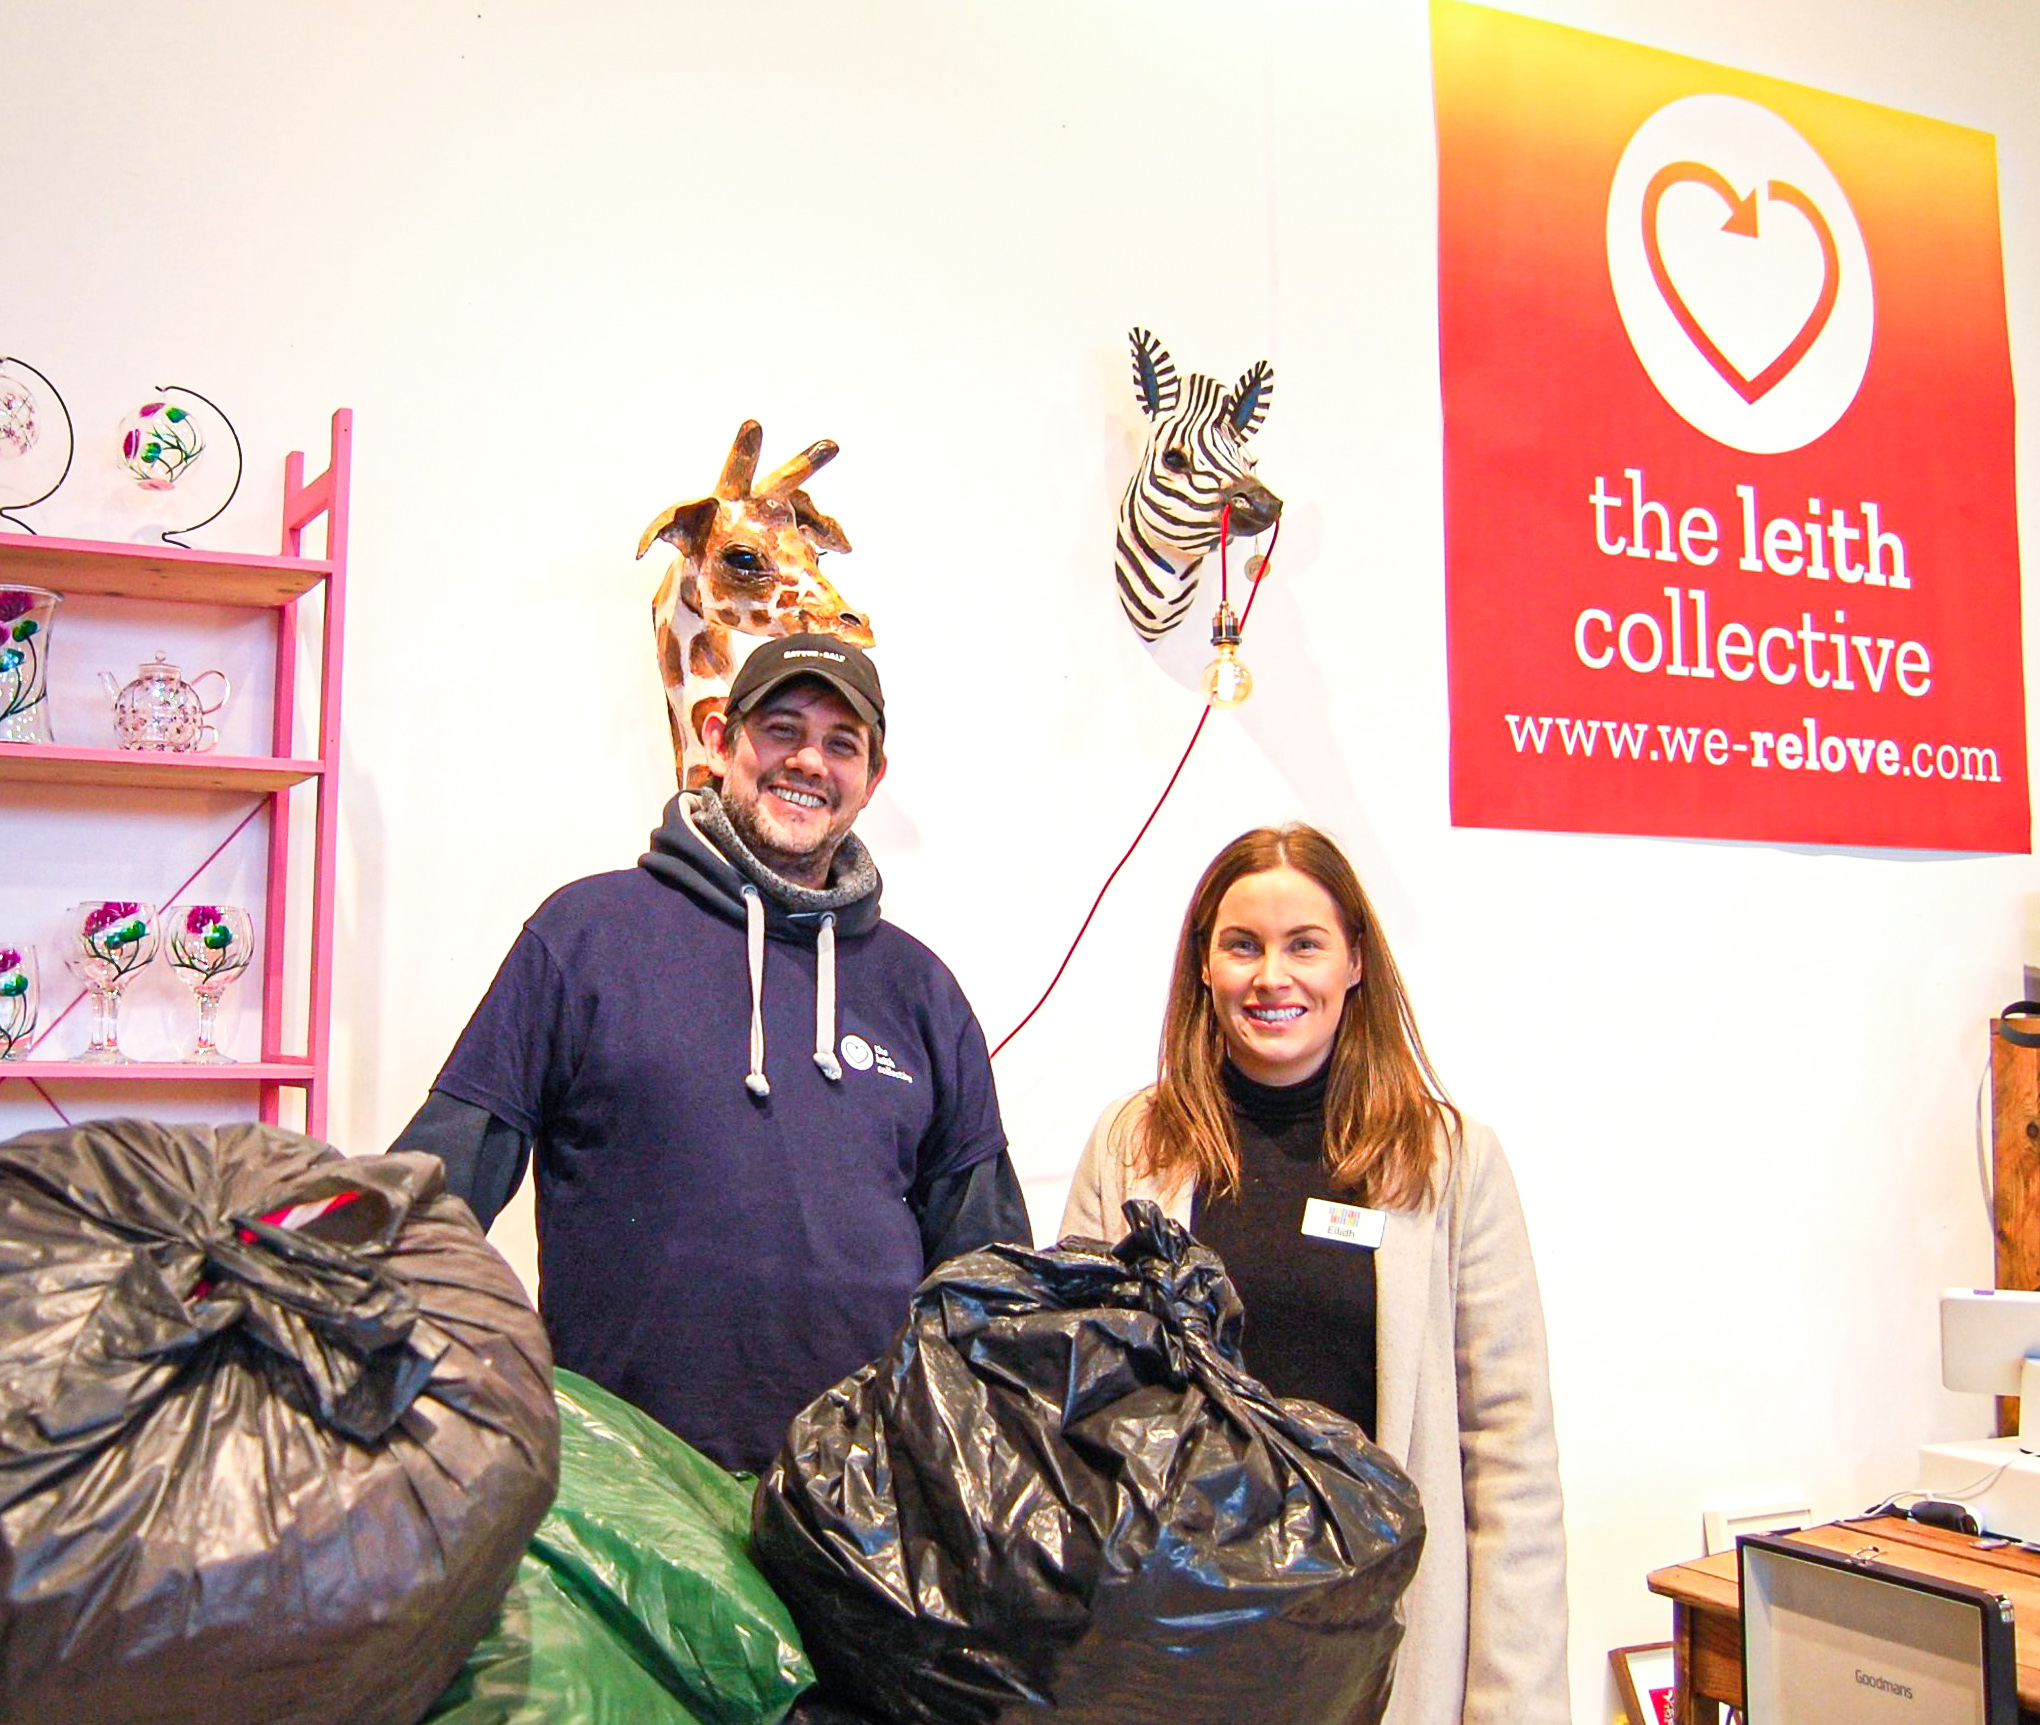 charity donation of winter coats gifted by urban union staff to the Leith collective 